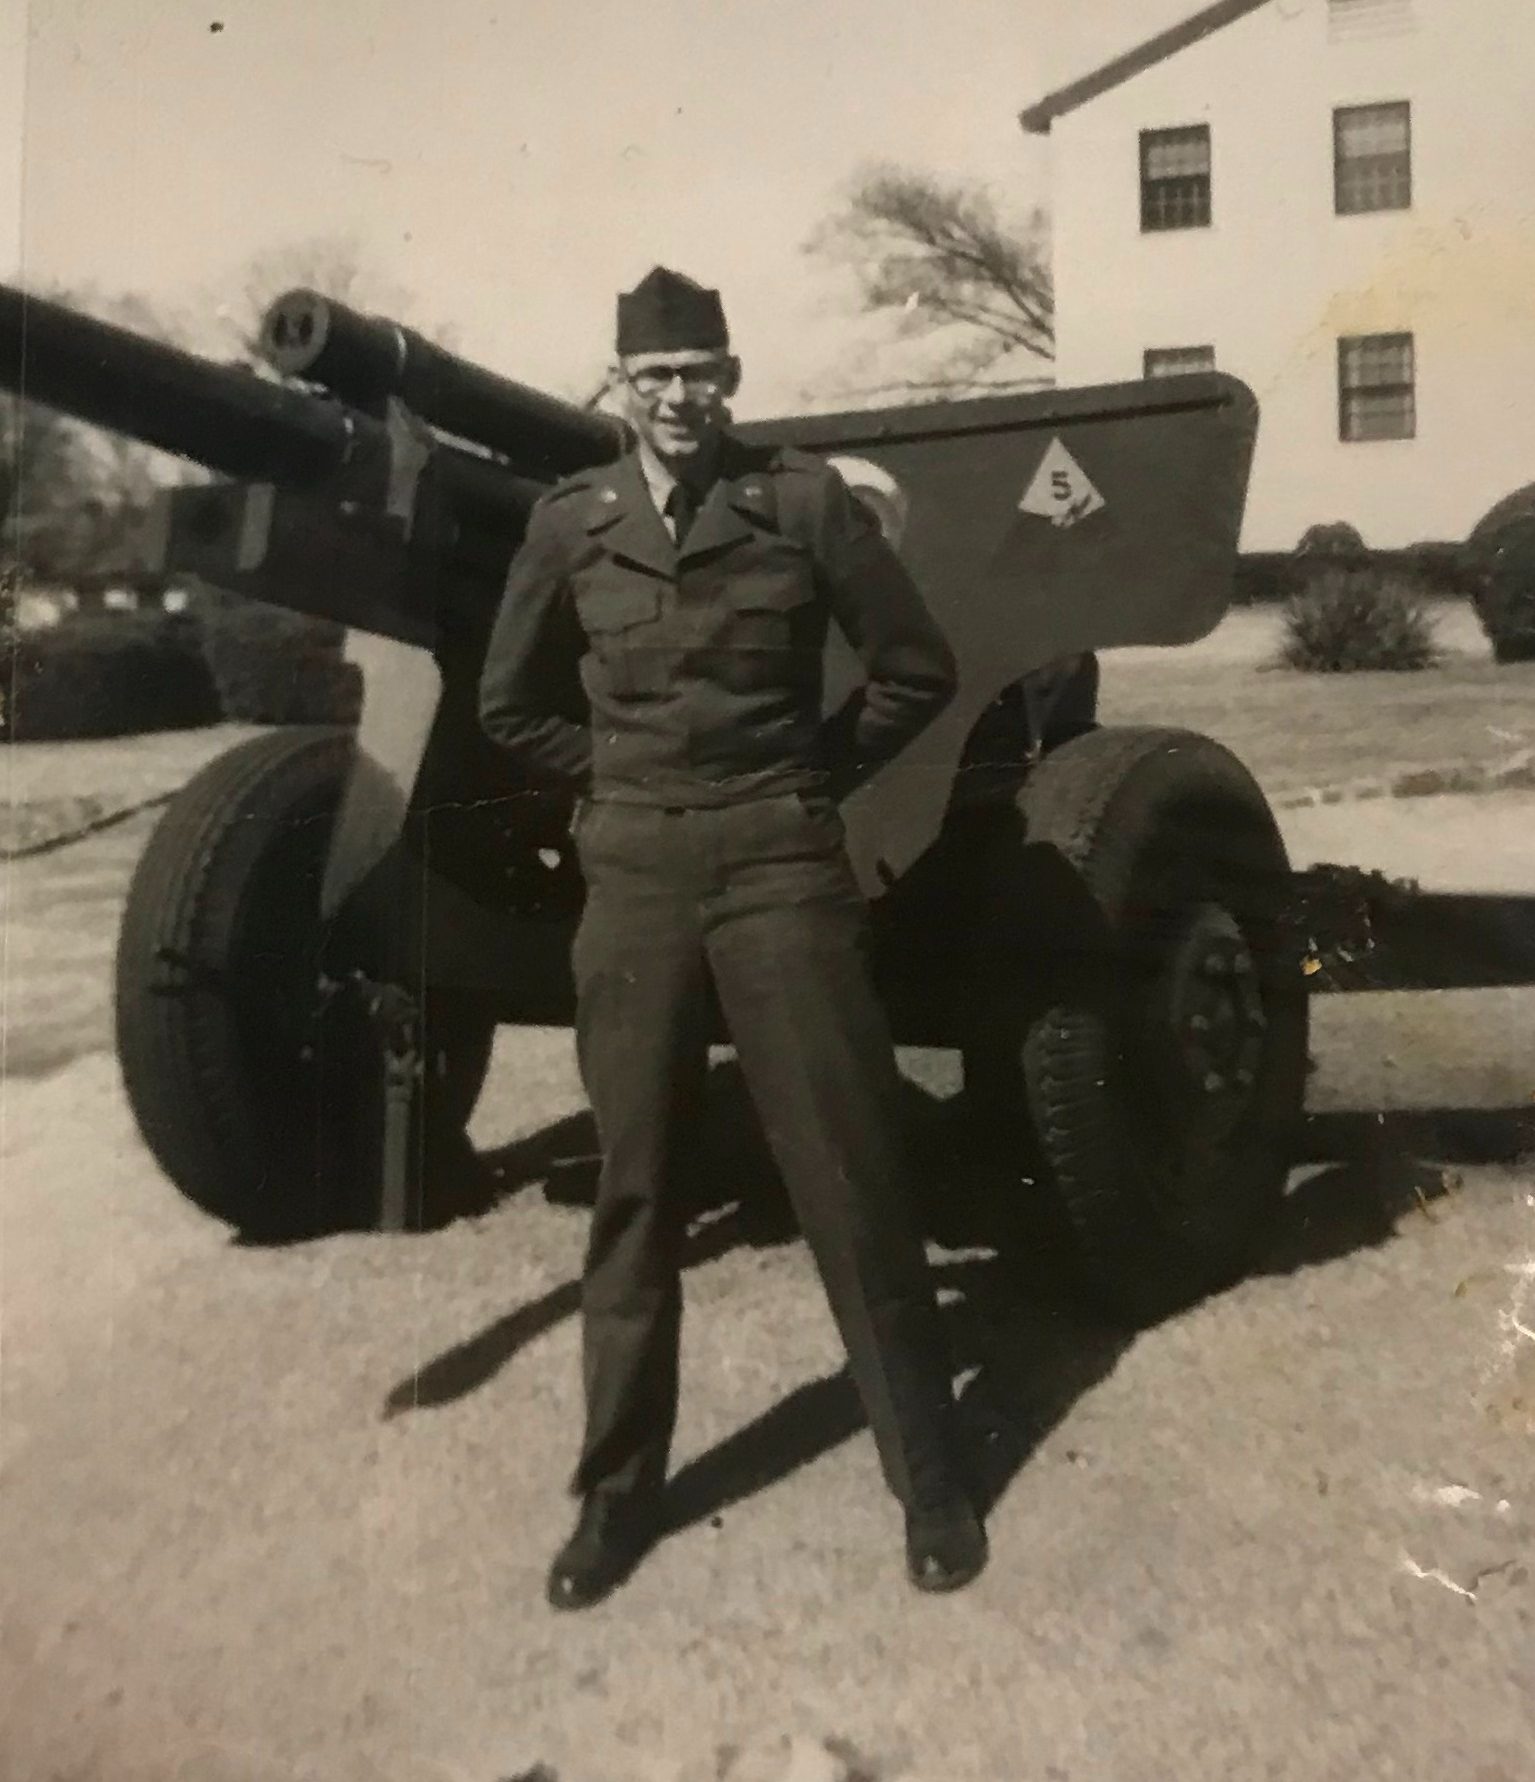 Bob Lewis in uniform standing in front of a cannon.